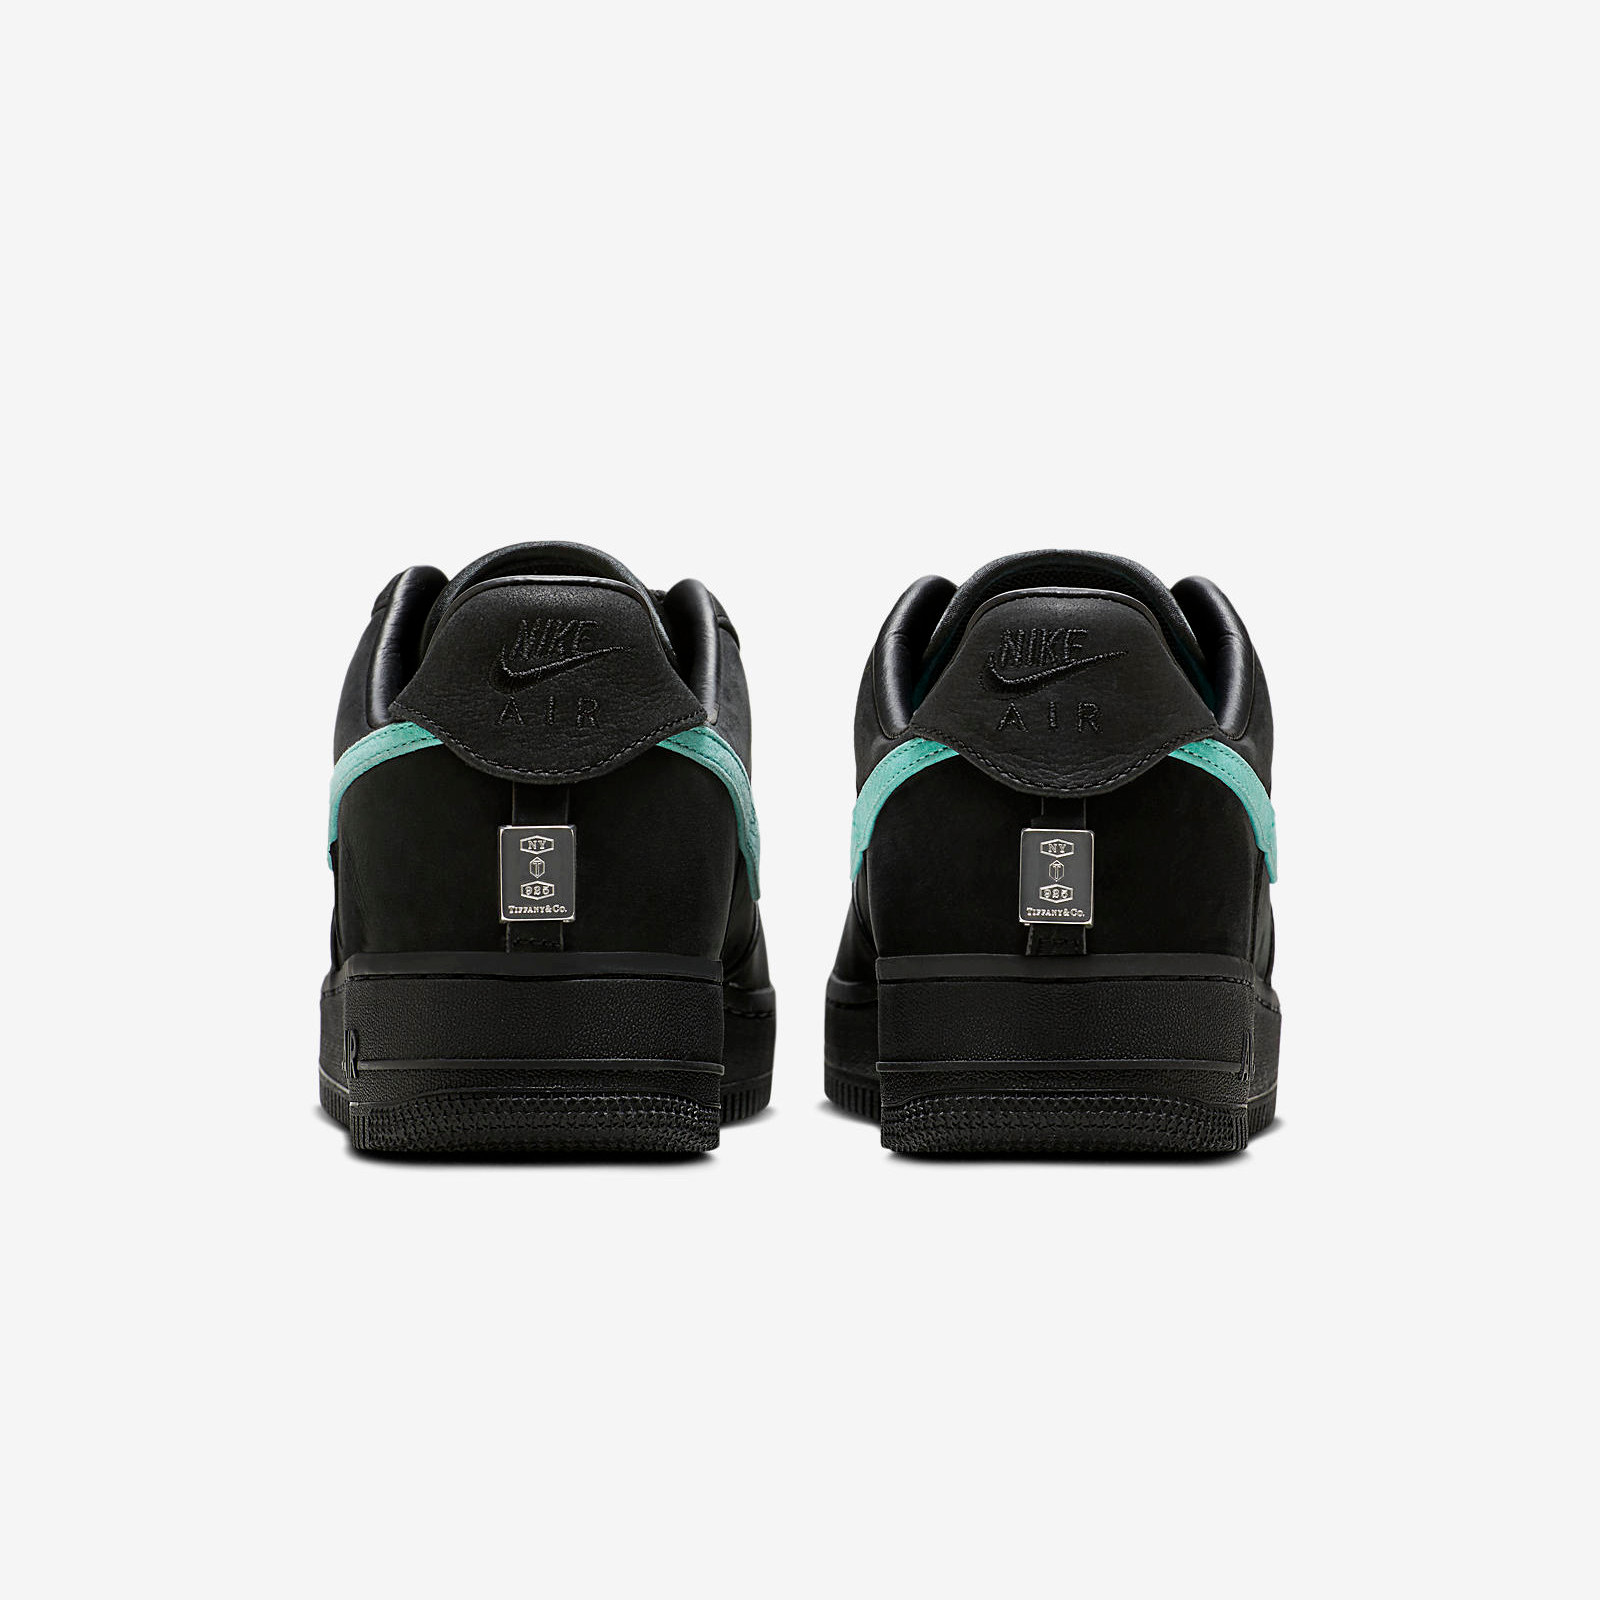 Tiffany & Co. x Nike
Air Force 1 Low
« 1837 »